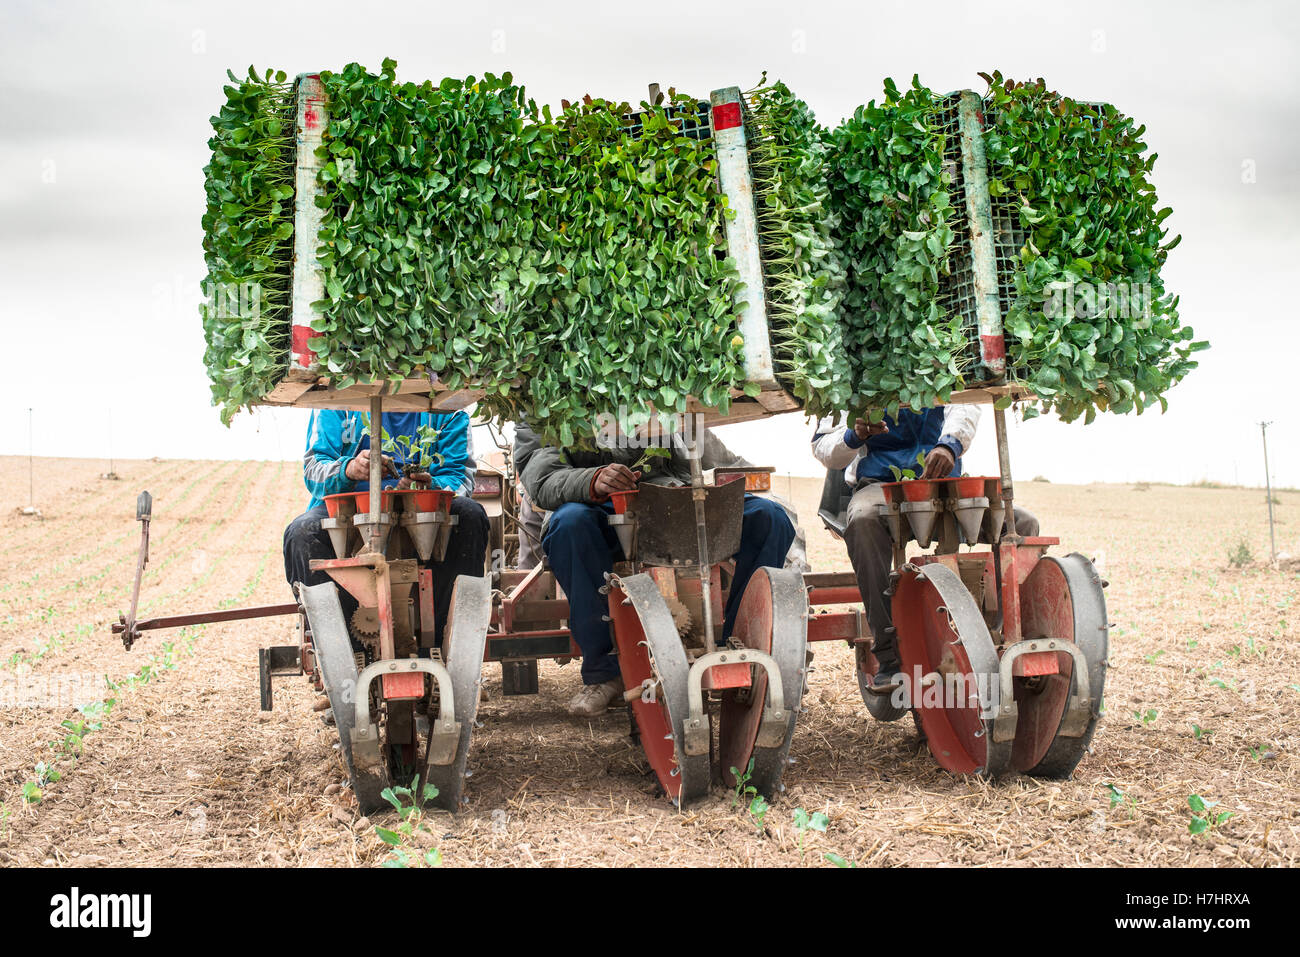 Planting seedlings machine on the field Stock Photo